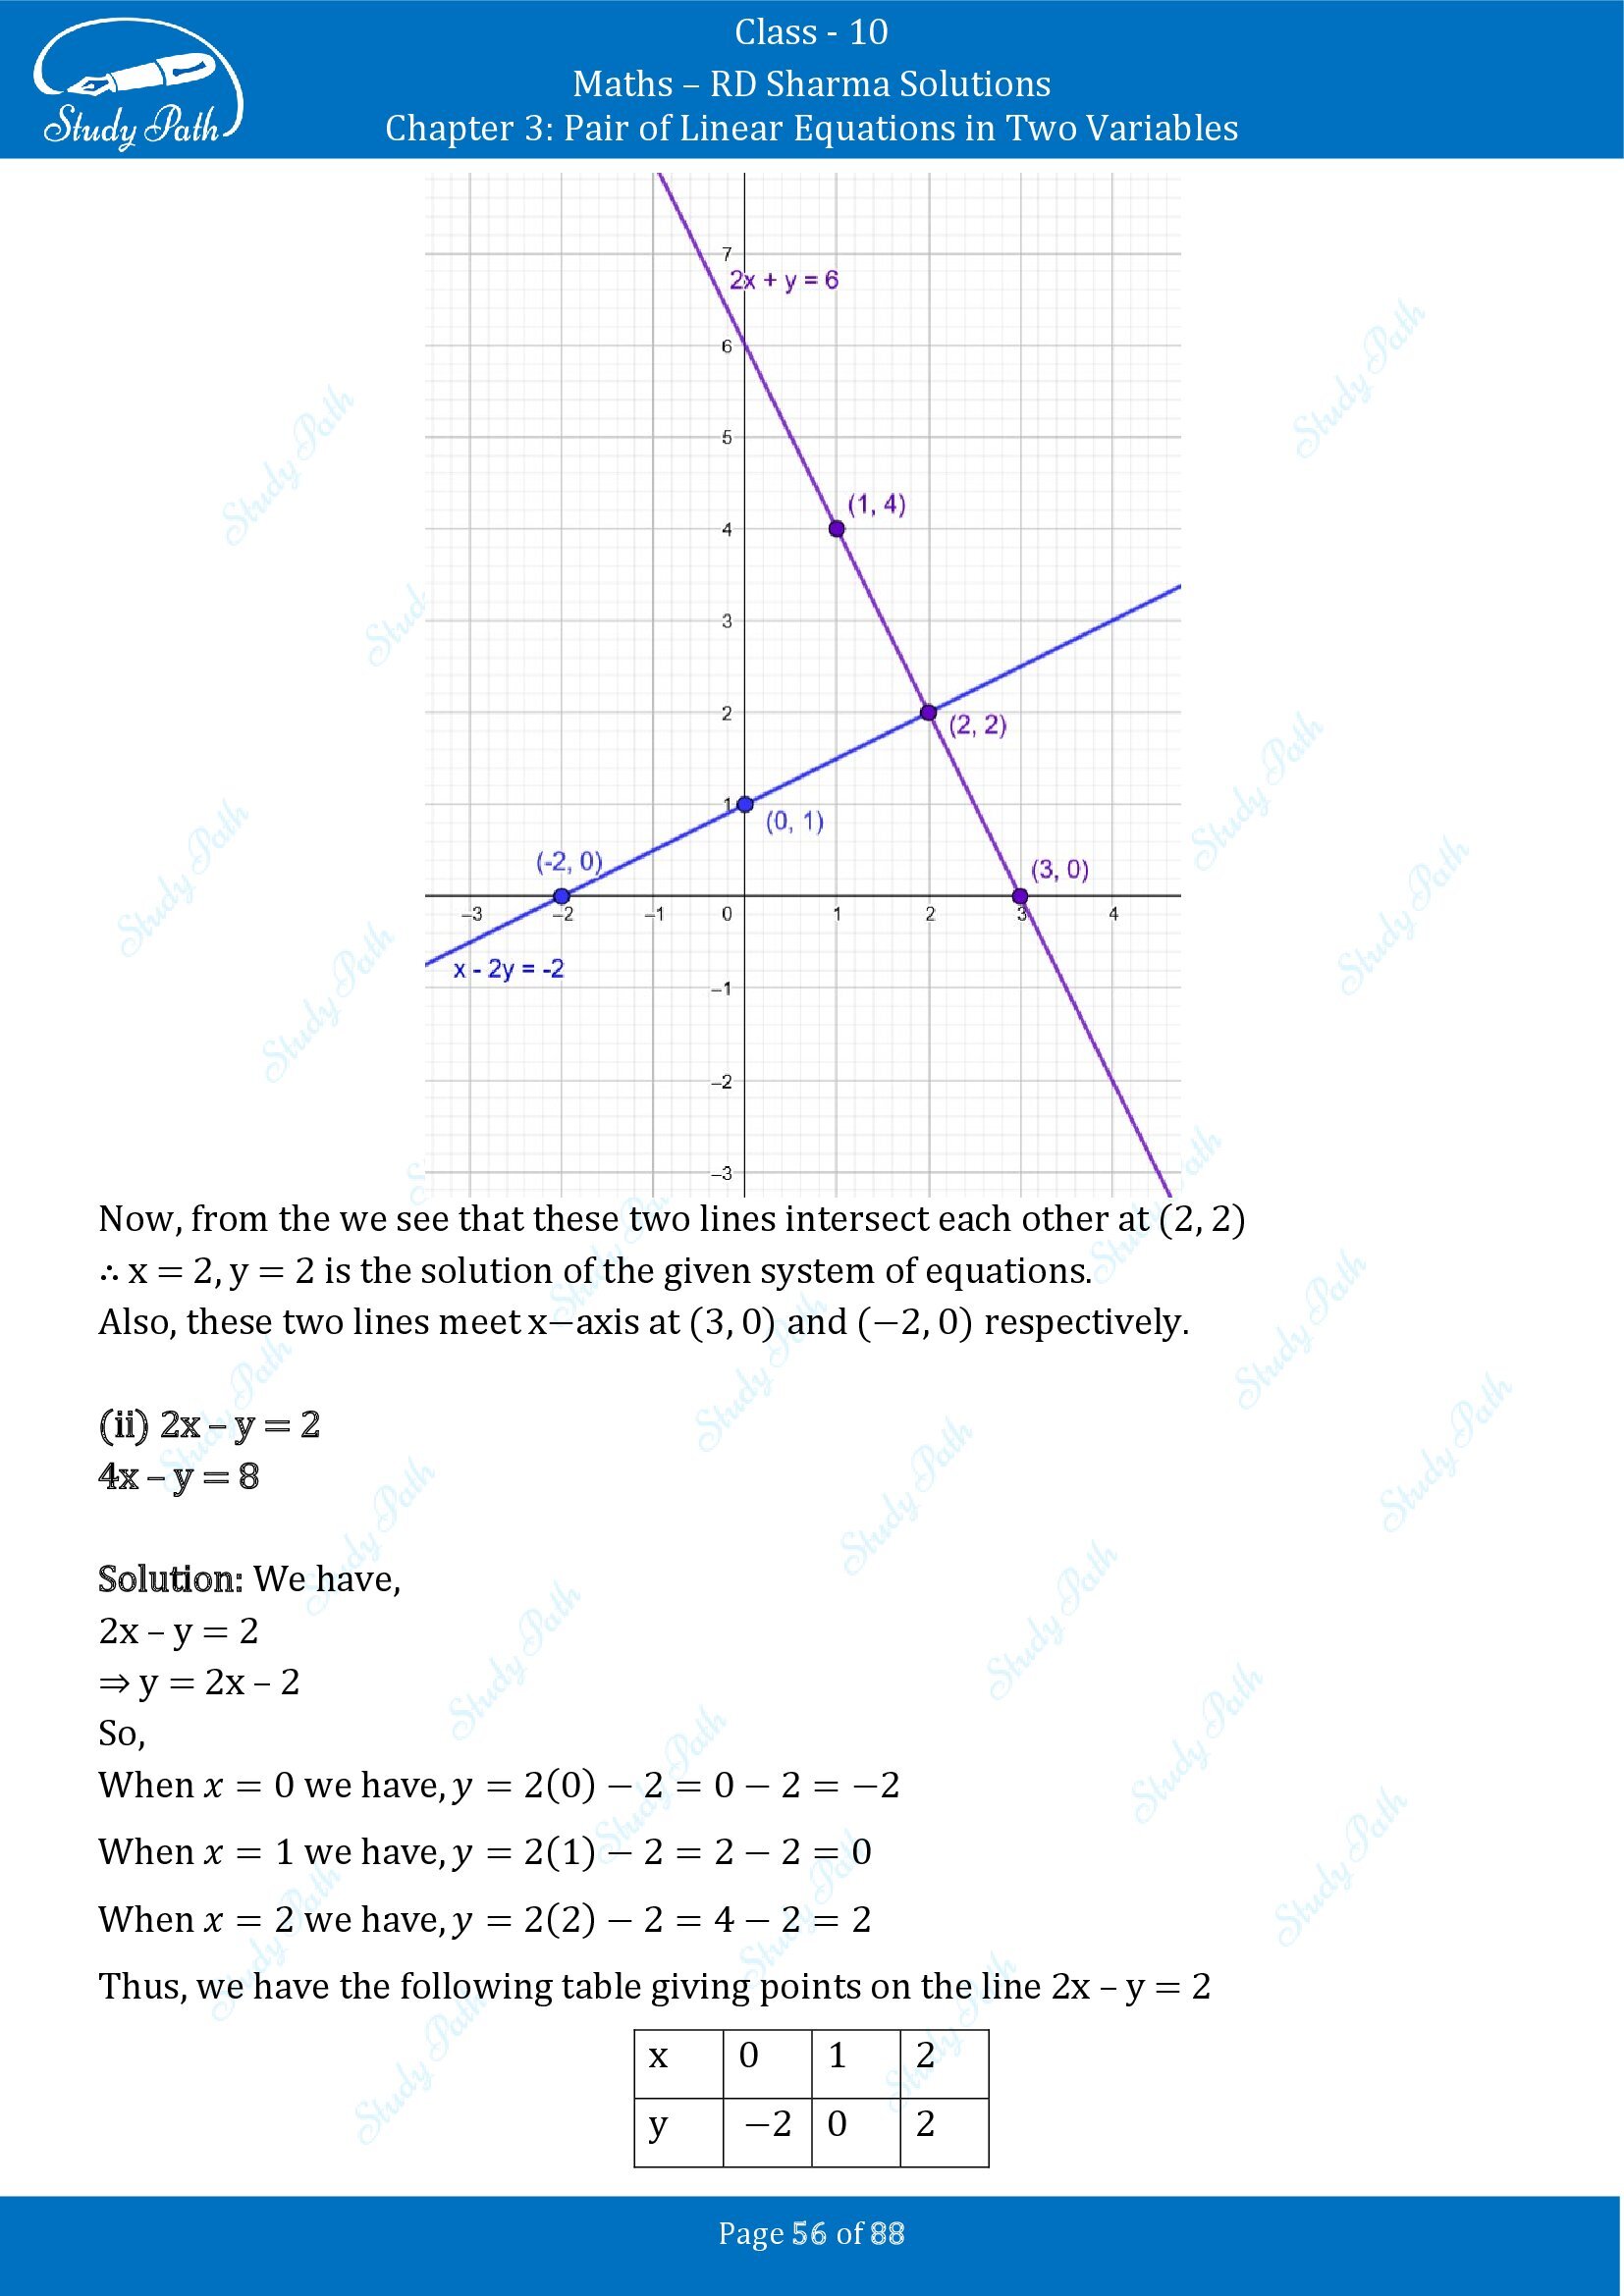 RD Sharma Solutions Class 10 Chapter 3 Pair of Linear Equations in Two Variables Exercise 3.2 00056